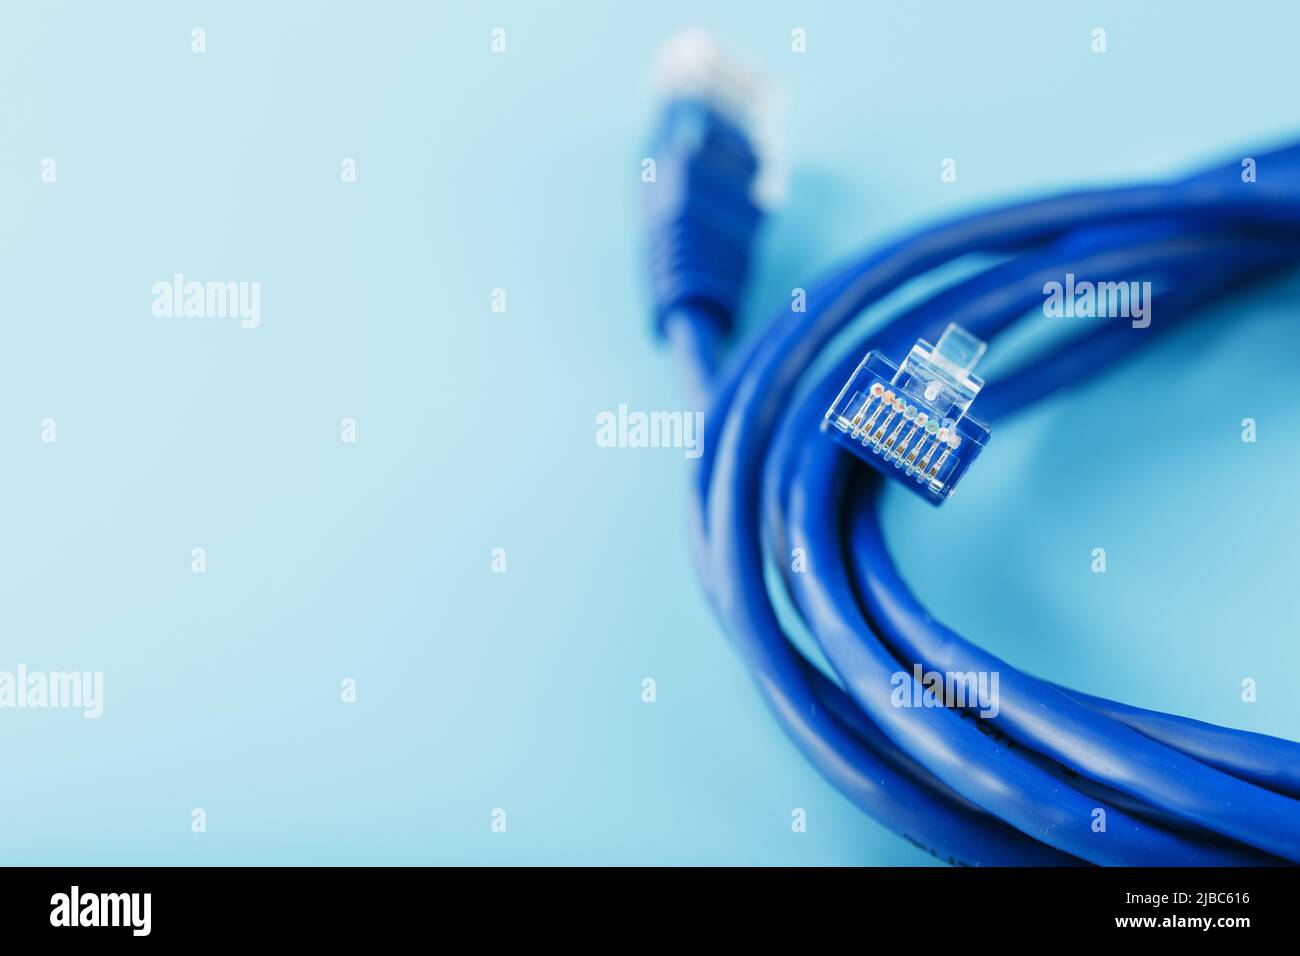 A coil of an Internet network cable for data transmission on a blue background. Patch cord for LAN cable. Stock Photo